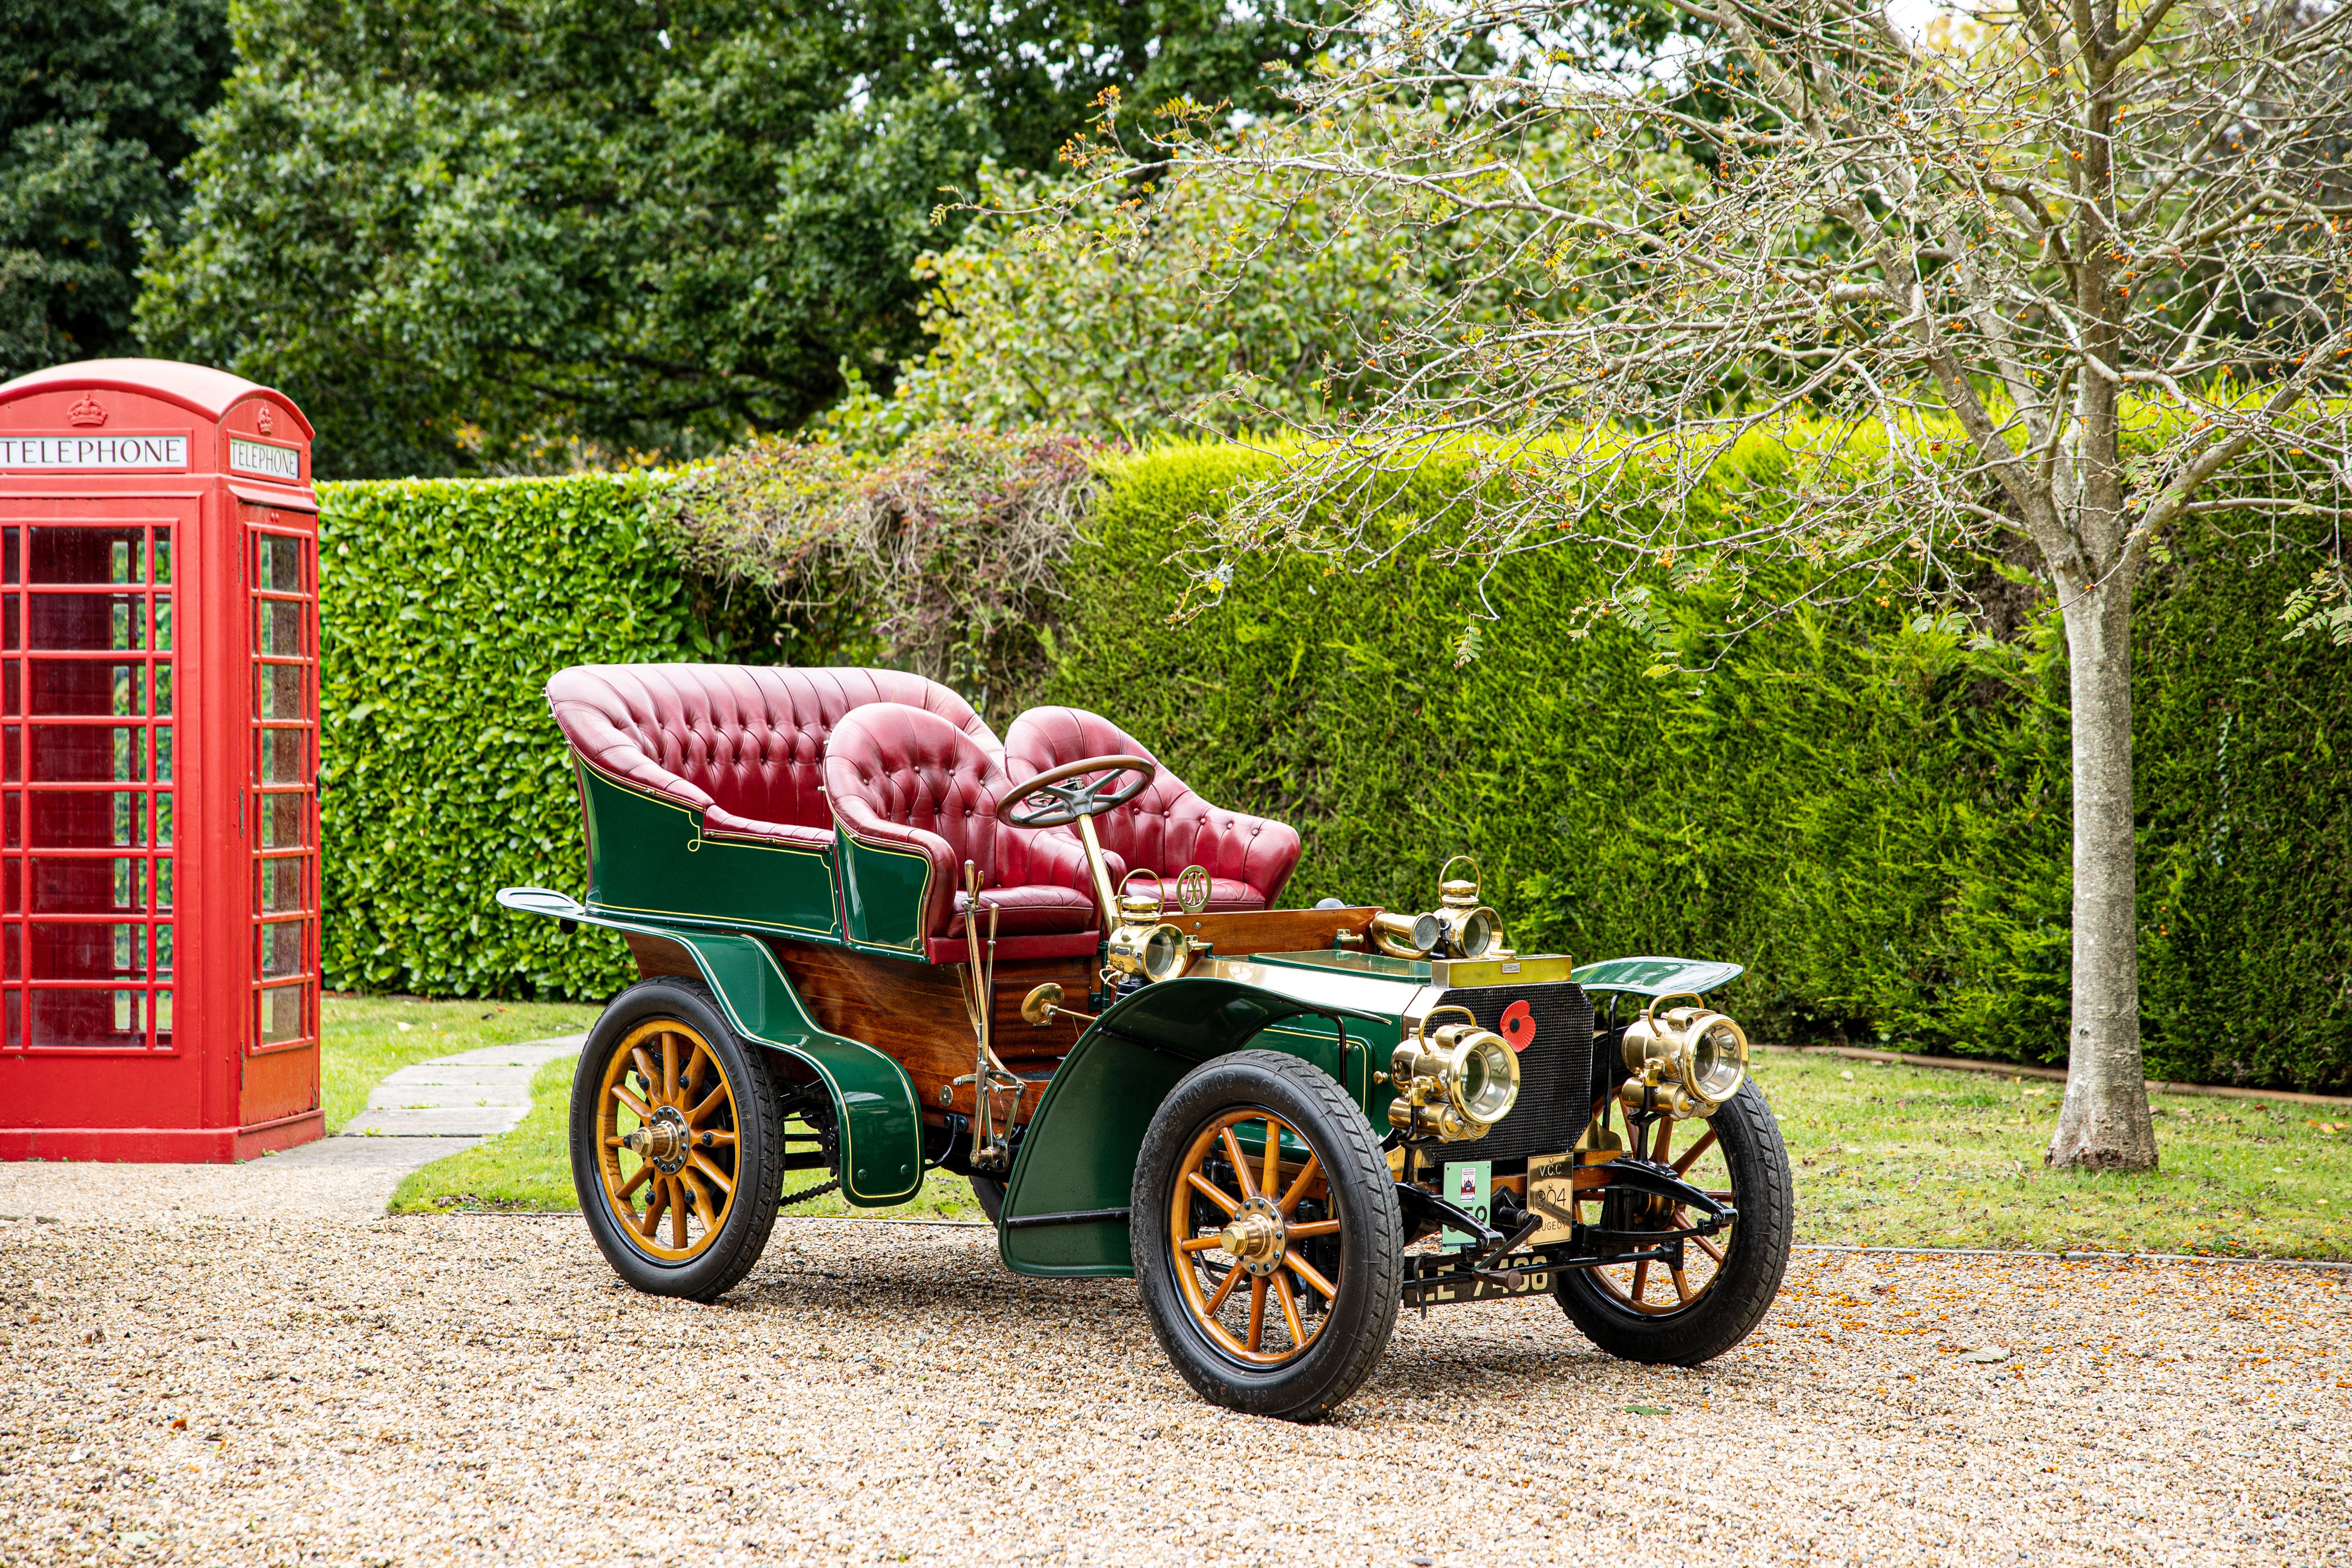 Entered in the 2021 London to Brighton Veteran Car Run,1904 Peugeot Type 67A 10/12hp Twin-Cylinde...